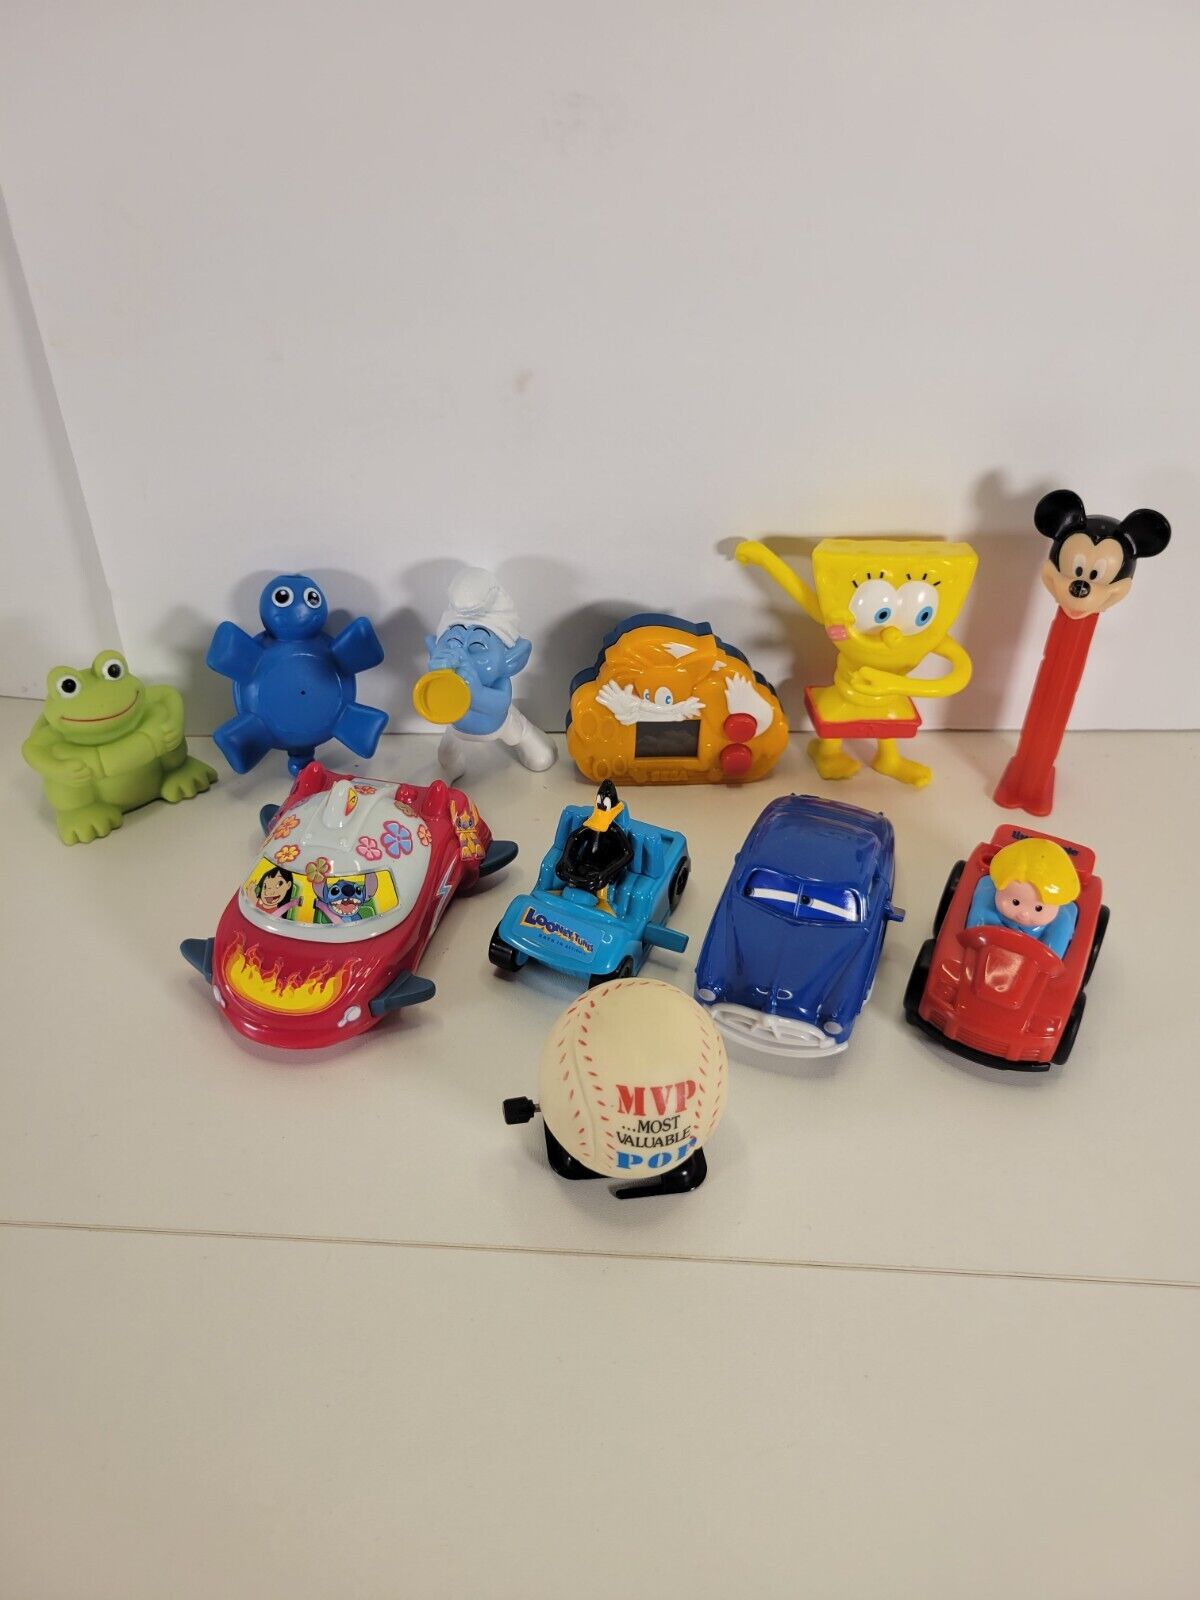 Vintage Mixed Toy lot from the 80s/90s/00s